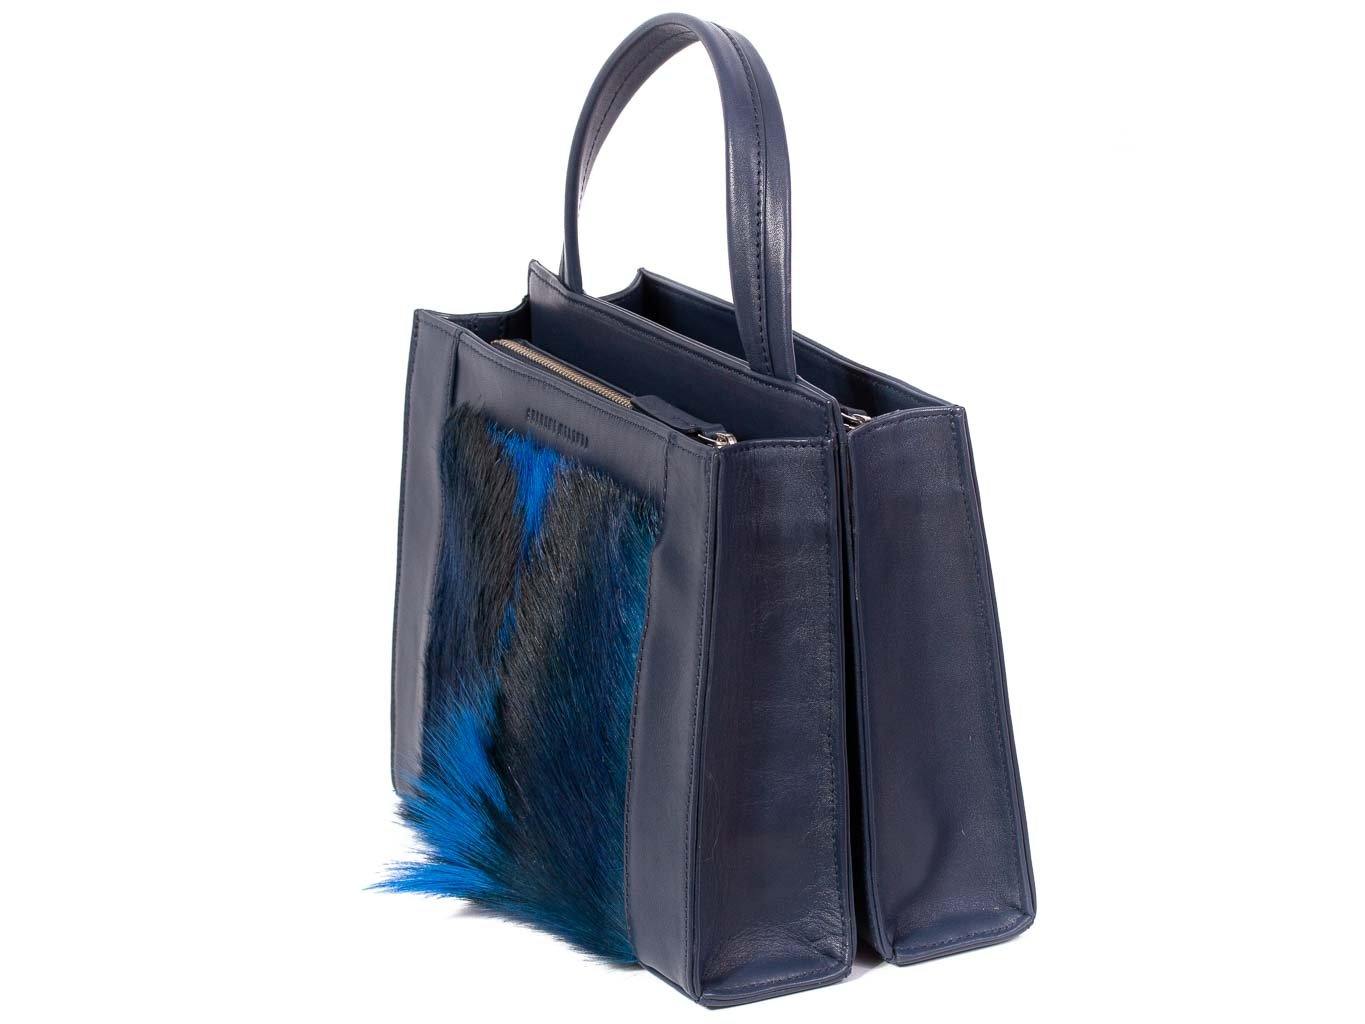 Top Handle Springbok Handbag in Navy Blue with a fan feature by Sherene Melinda front